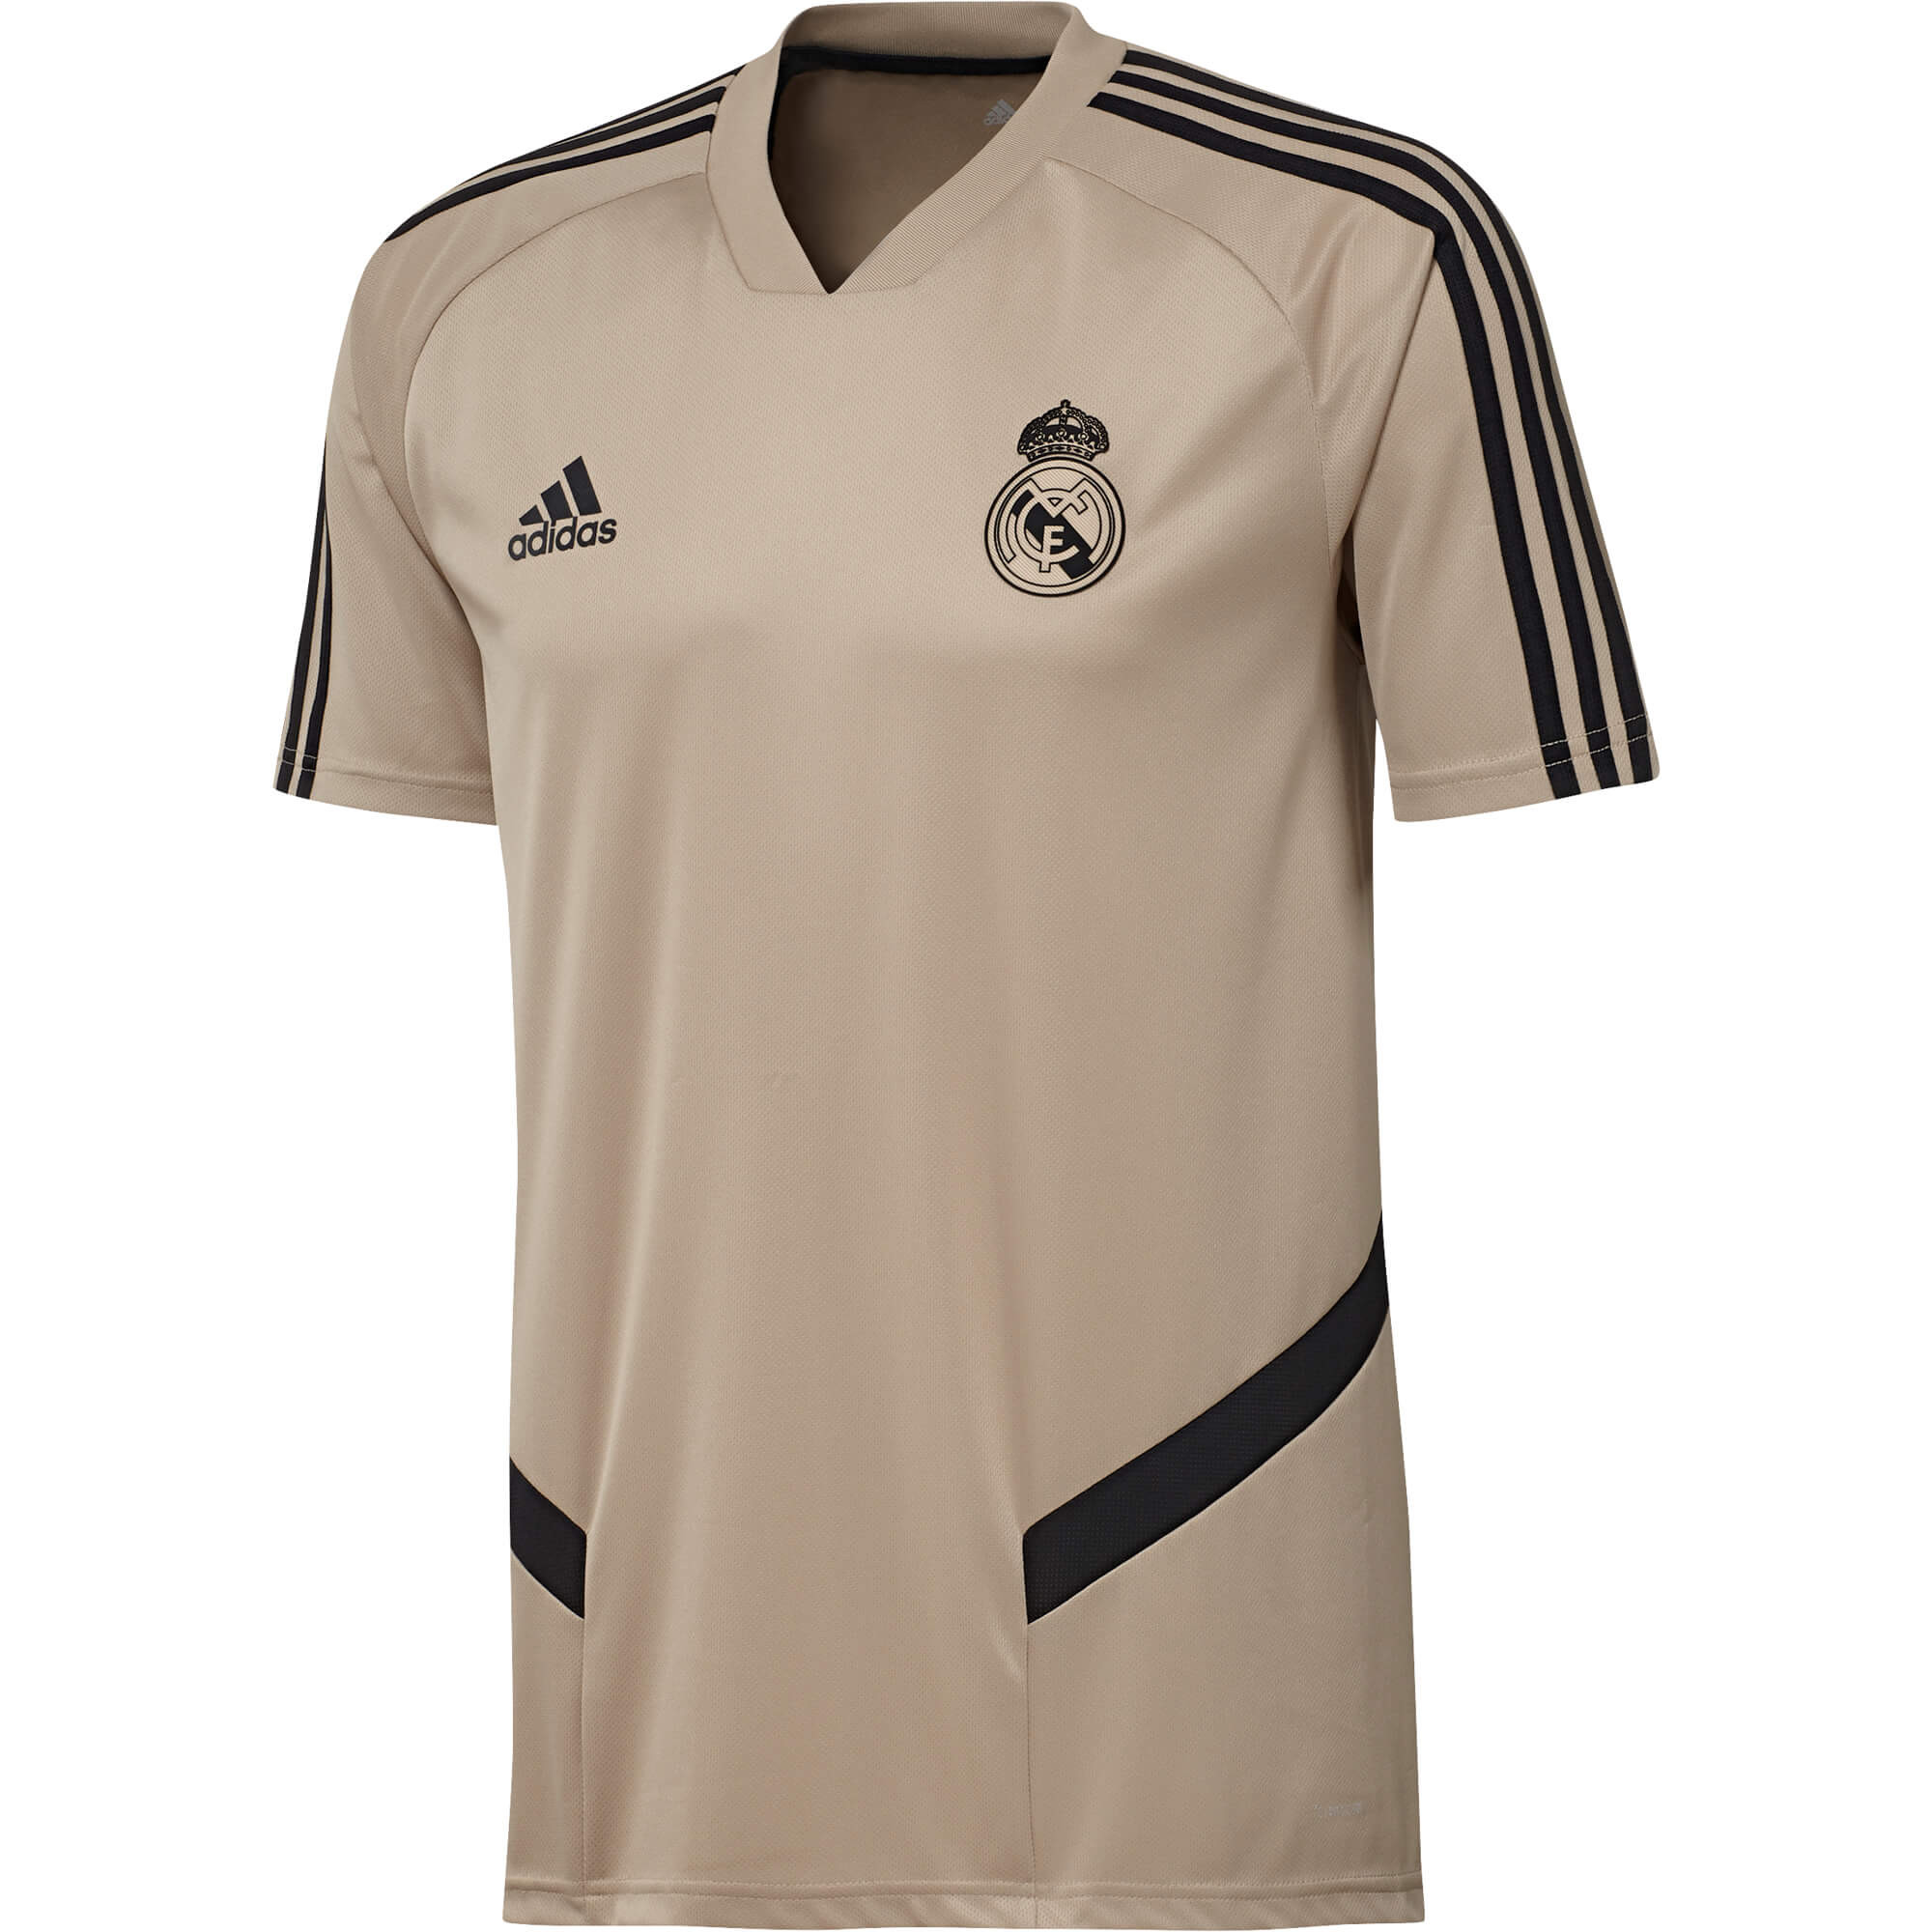 ADIDAS REAL MADRID MAILLOT ENTRAINEMENT OR 2019/2020